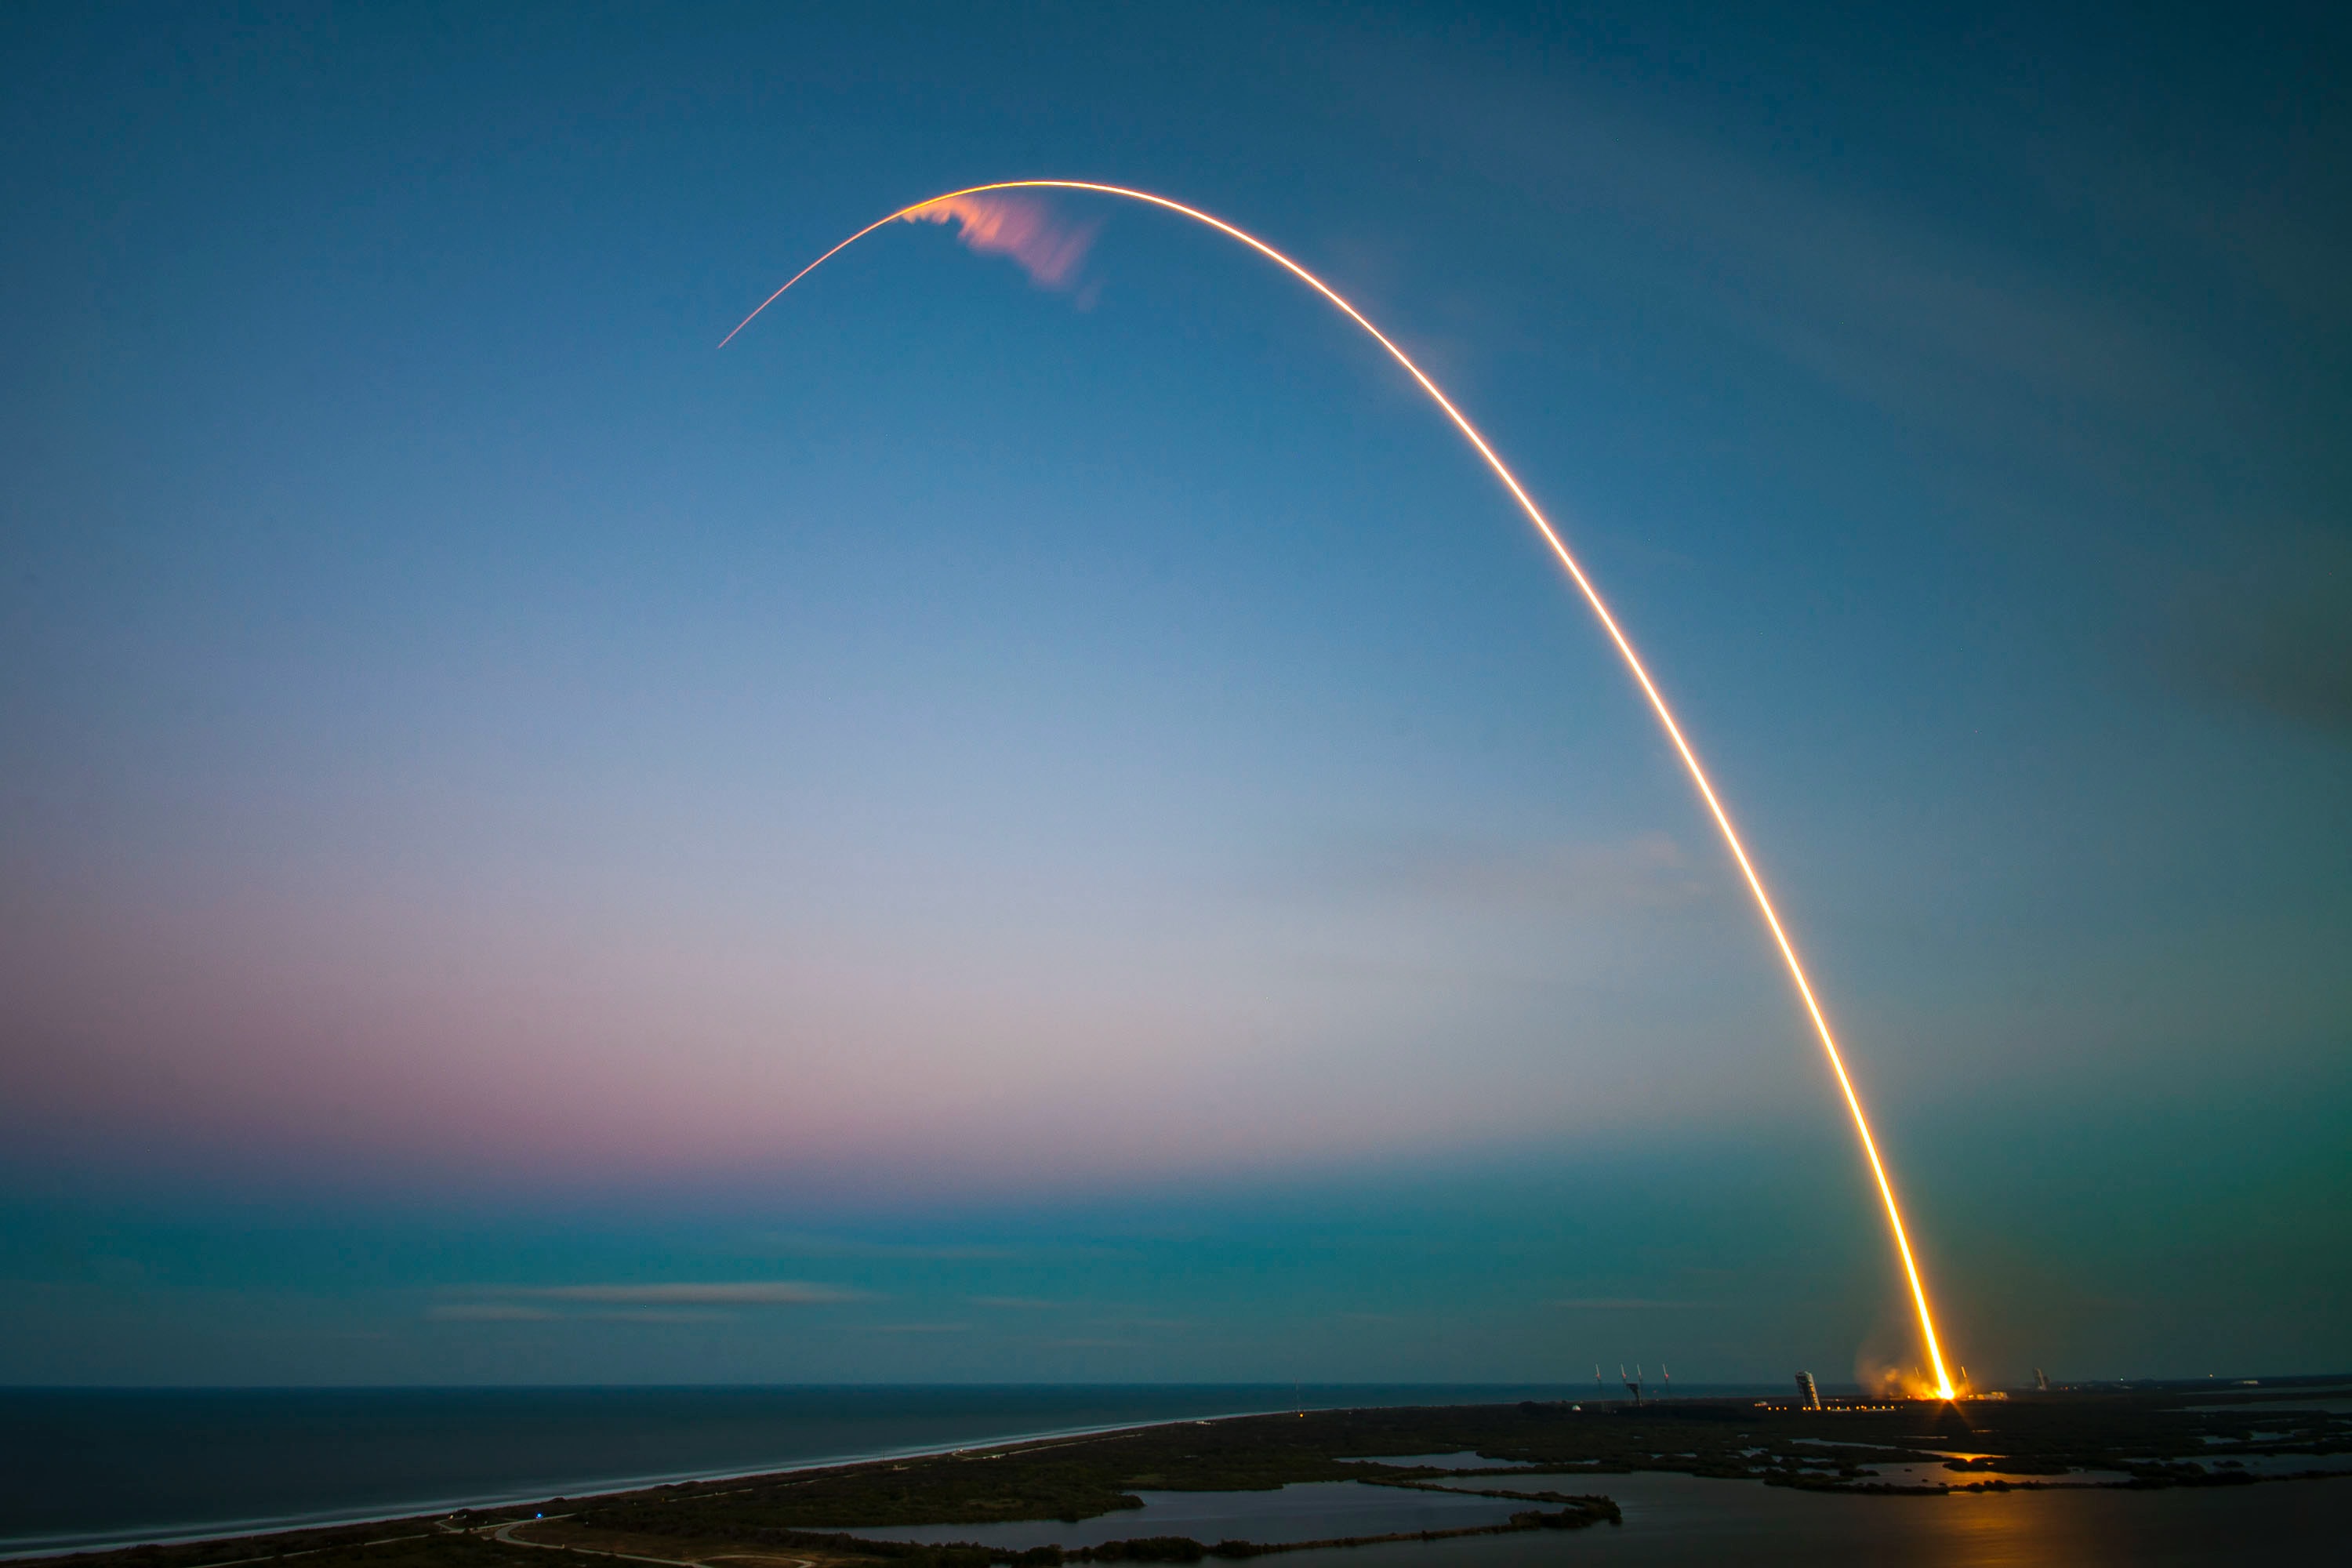 Banner photo by SpaceX on Unsplash